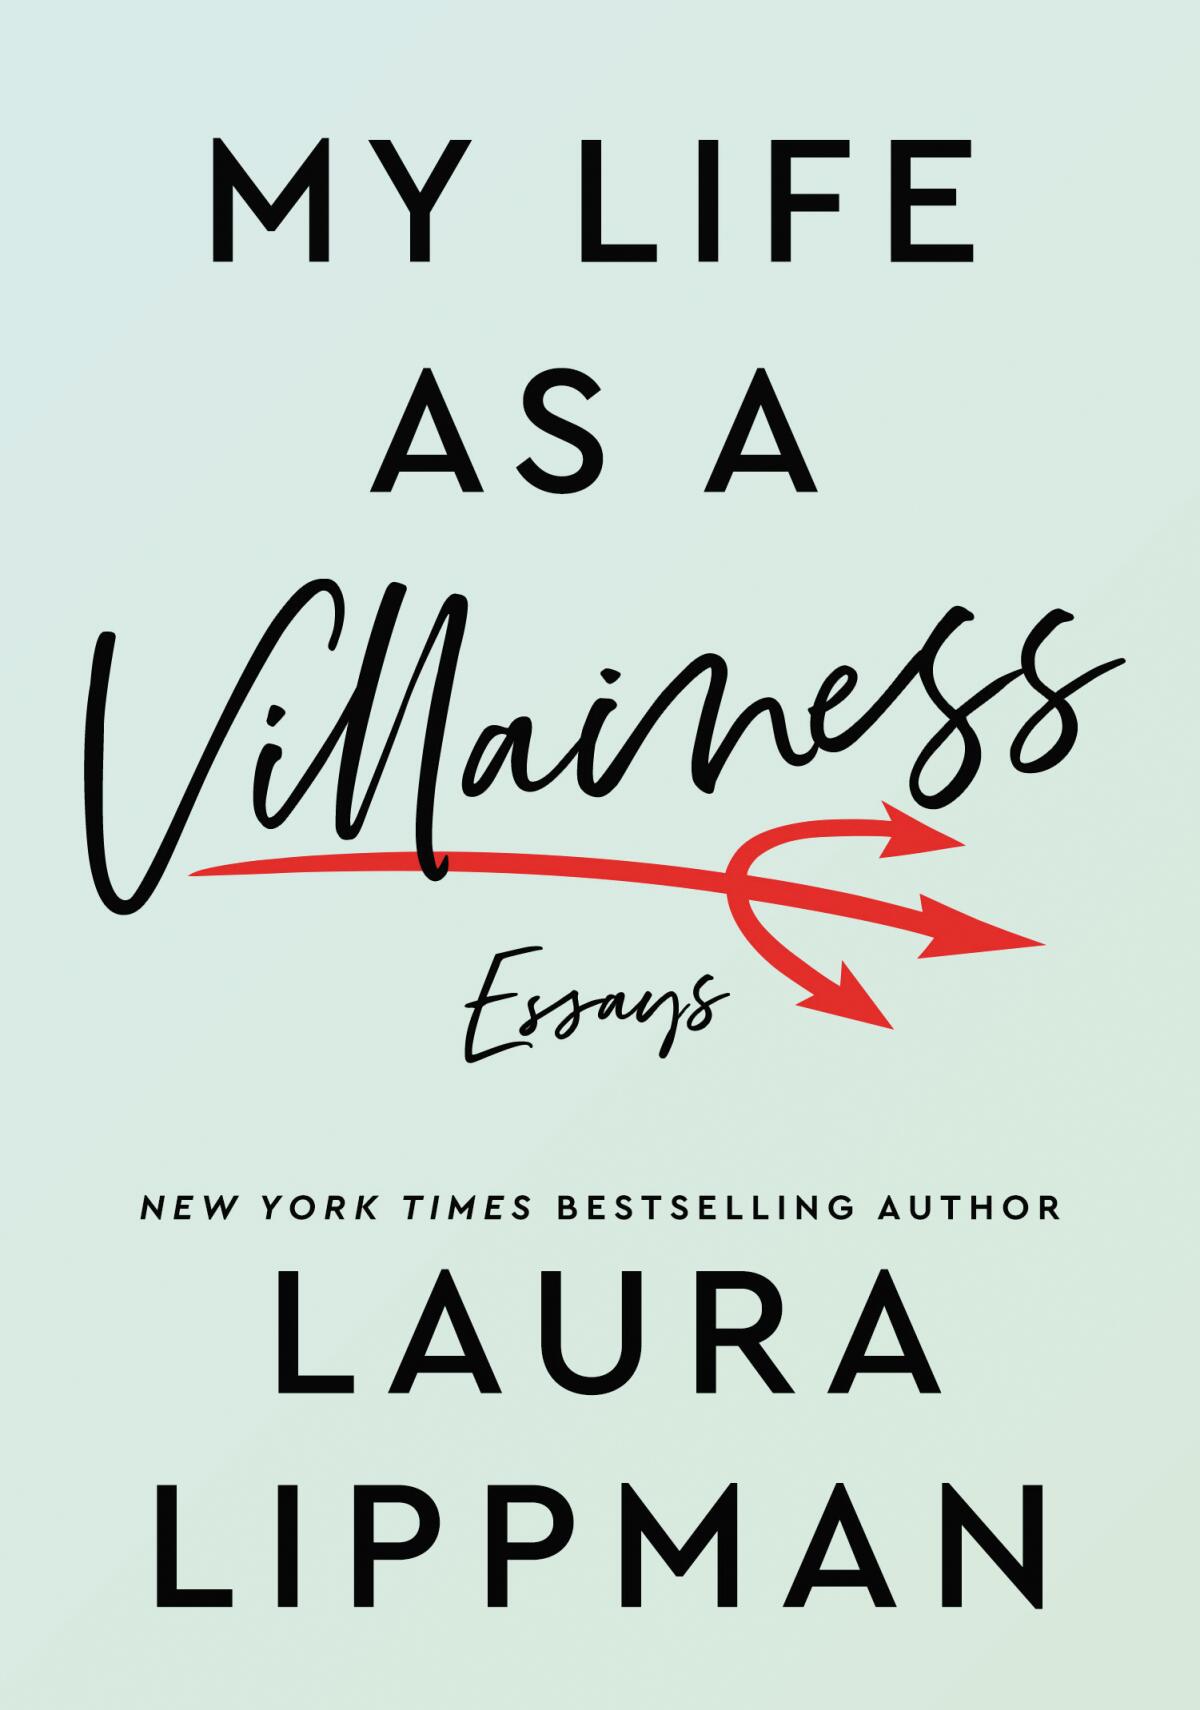 A book jacket for "My Life as a Villainess," by Laura Lippman.